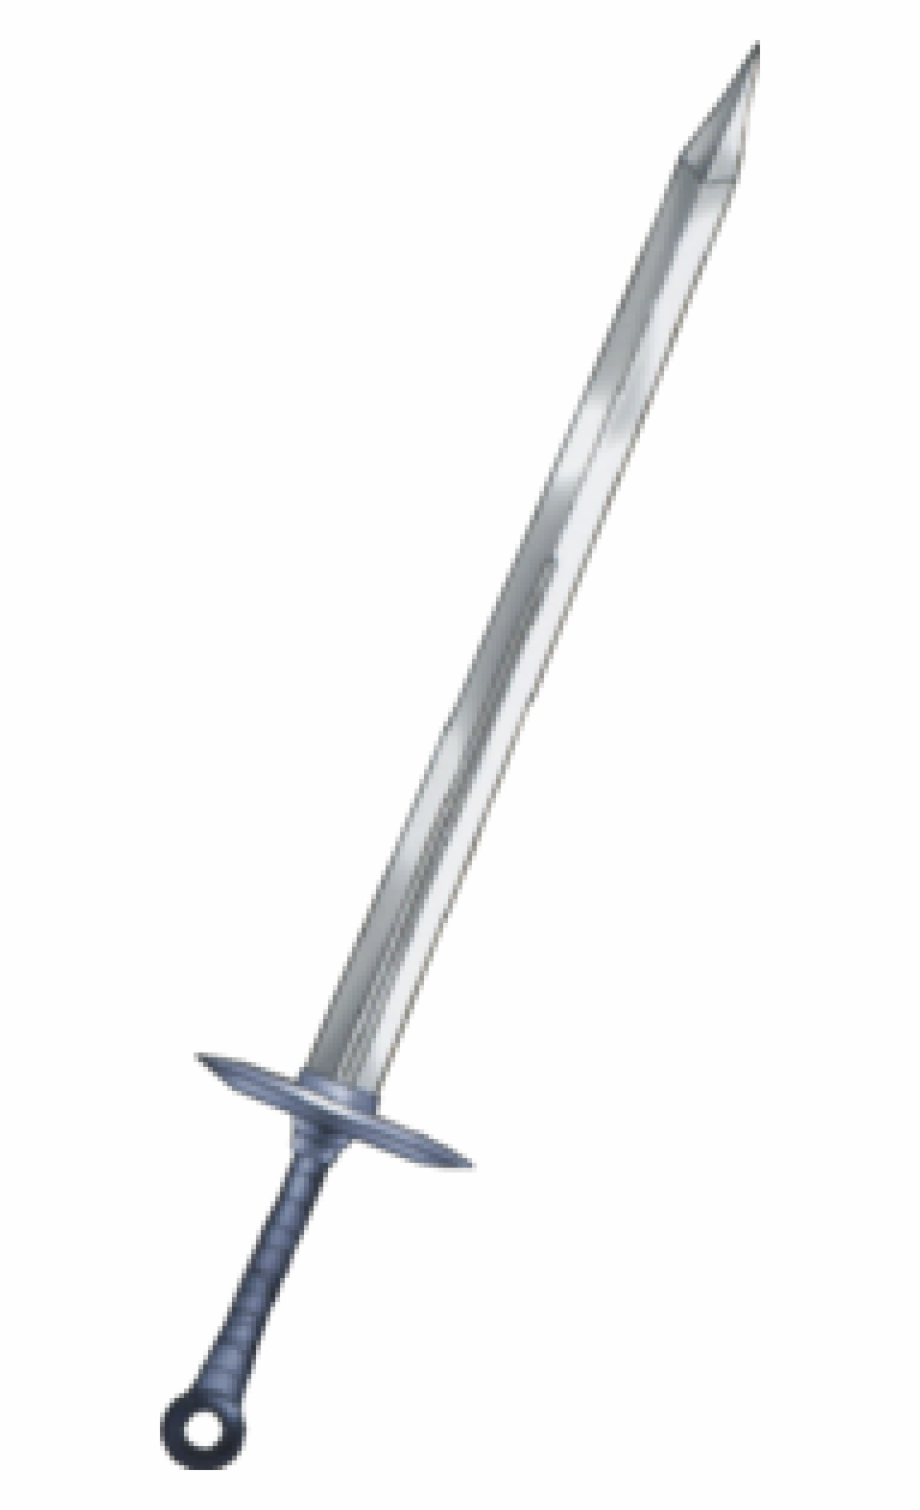 Guts-0 - Anime Characters With Big Sword Transparent PNG - 381x571 - Free  Download on NicePNG